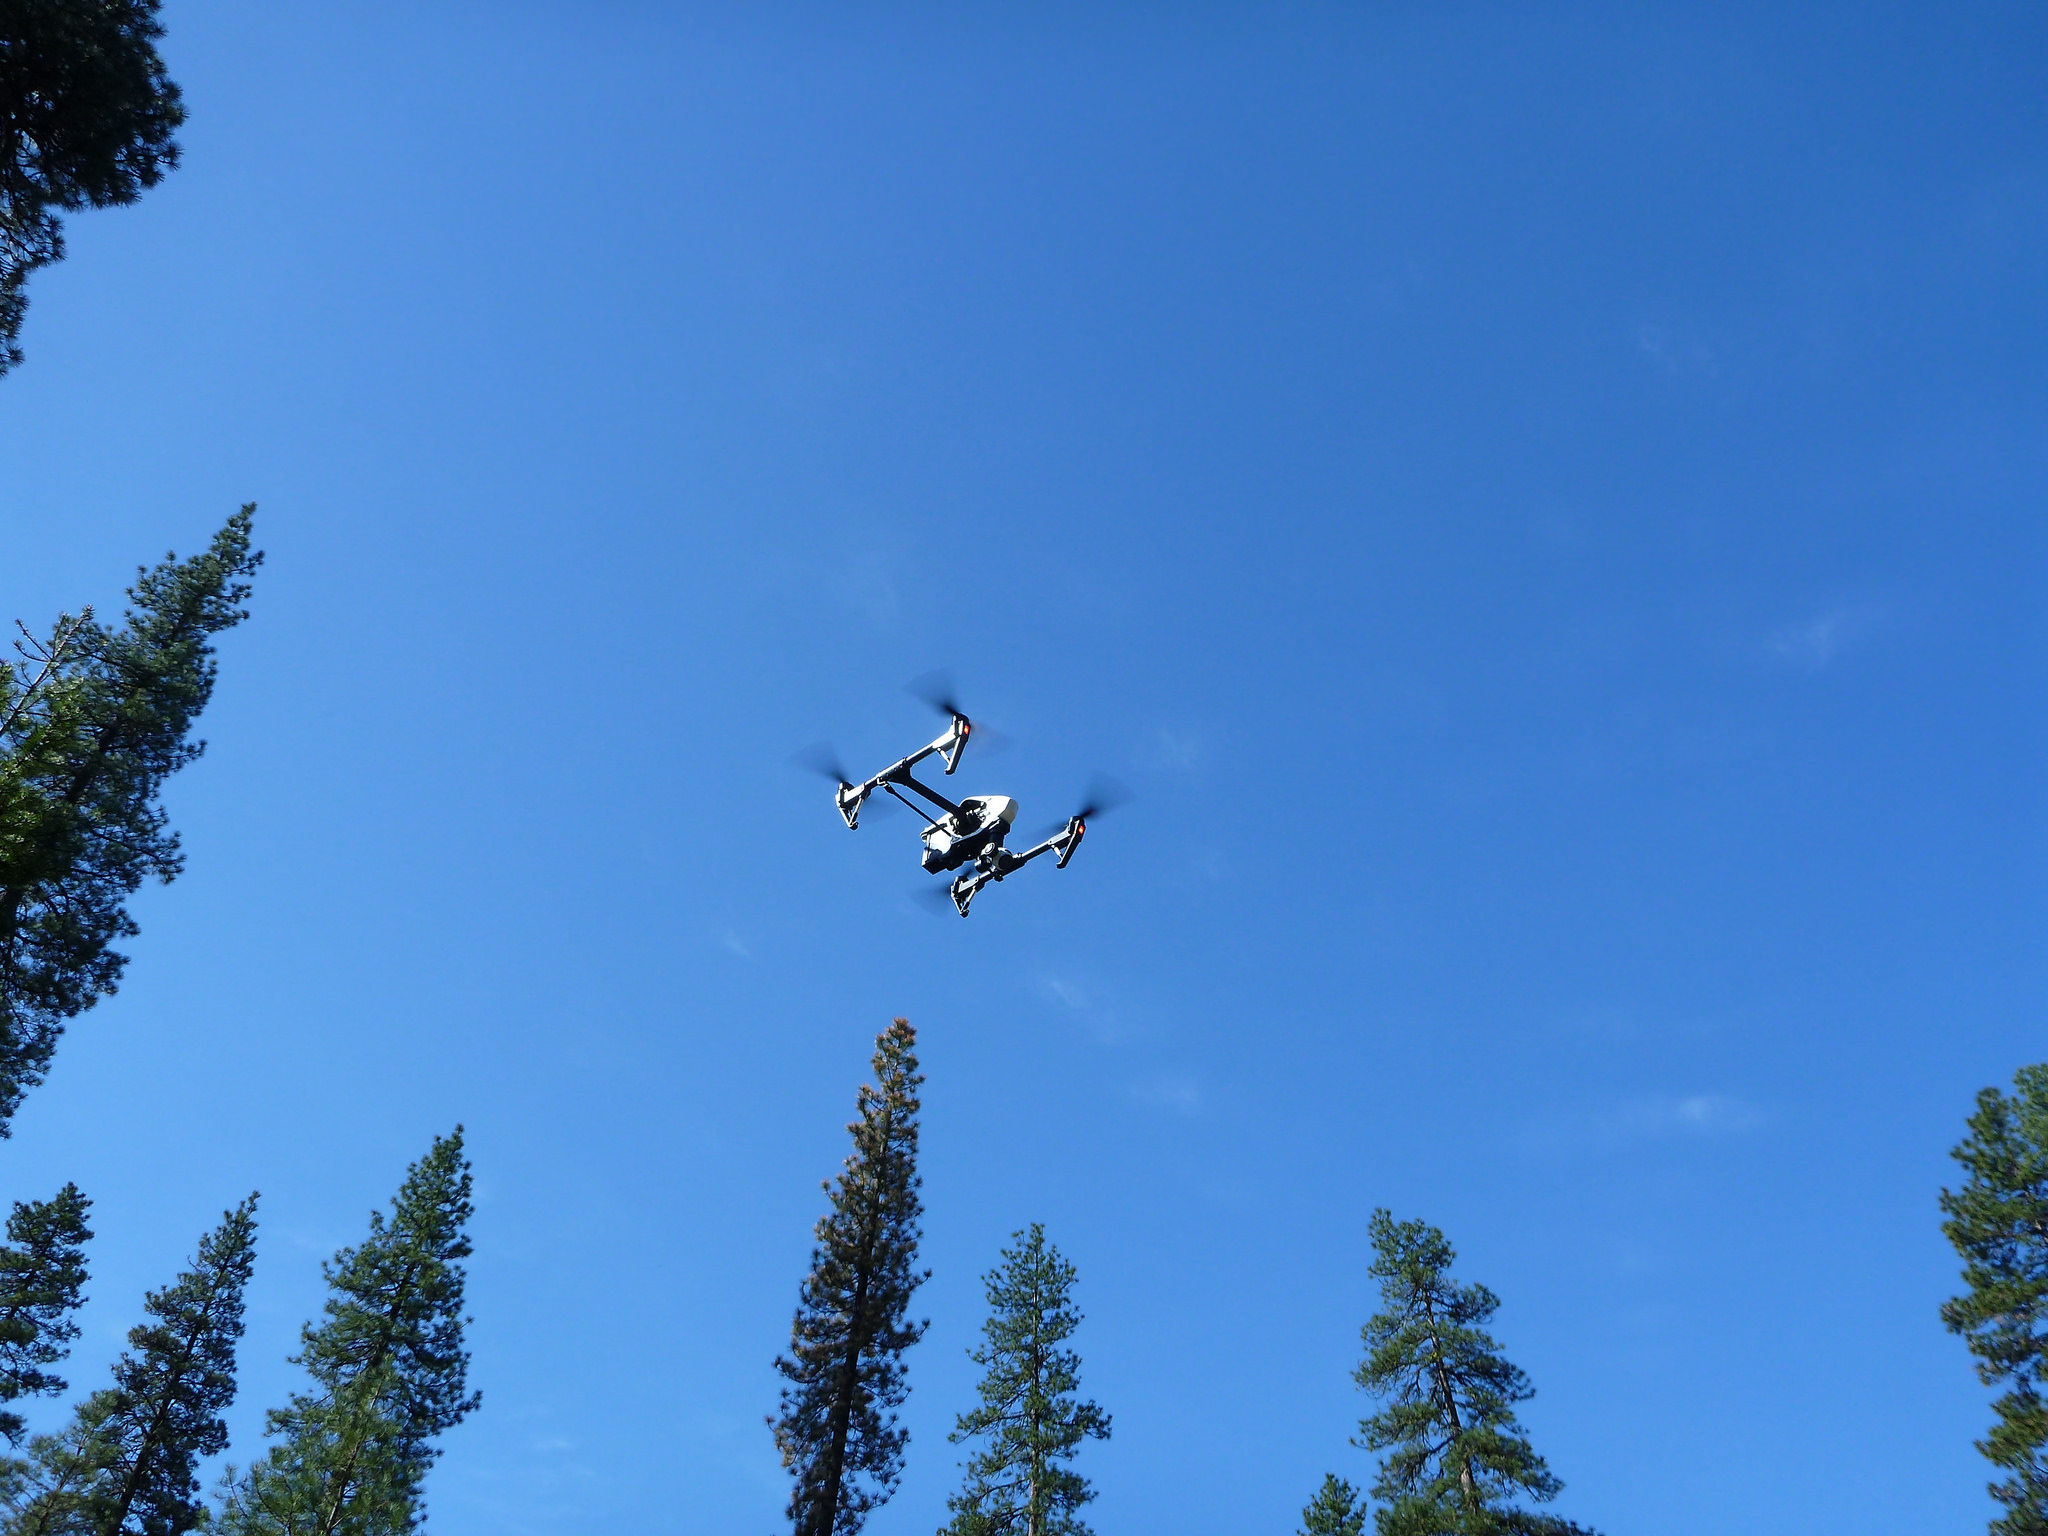 Unmanned aircraft systems, like this quadcopter, provide numerous benefits over manned aircraft for wildlife research. Image: Martin Criminale, Flickr